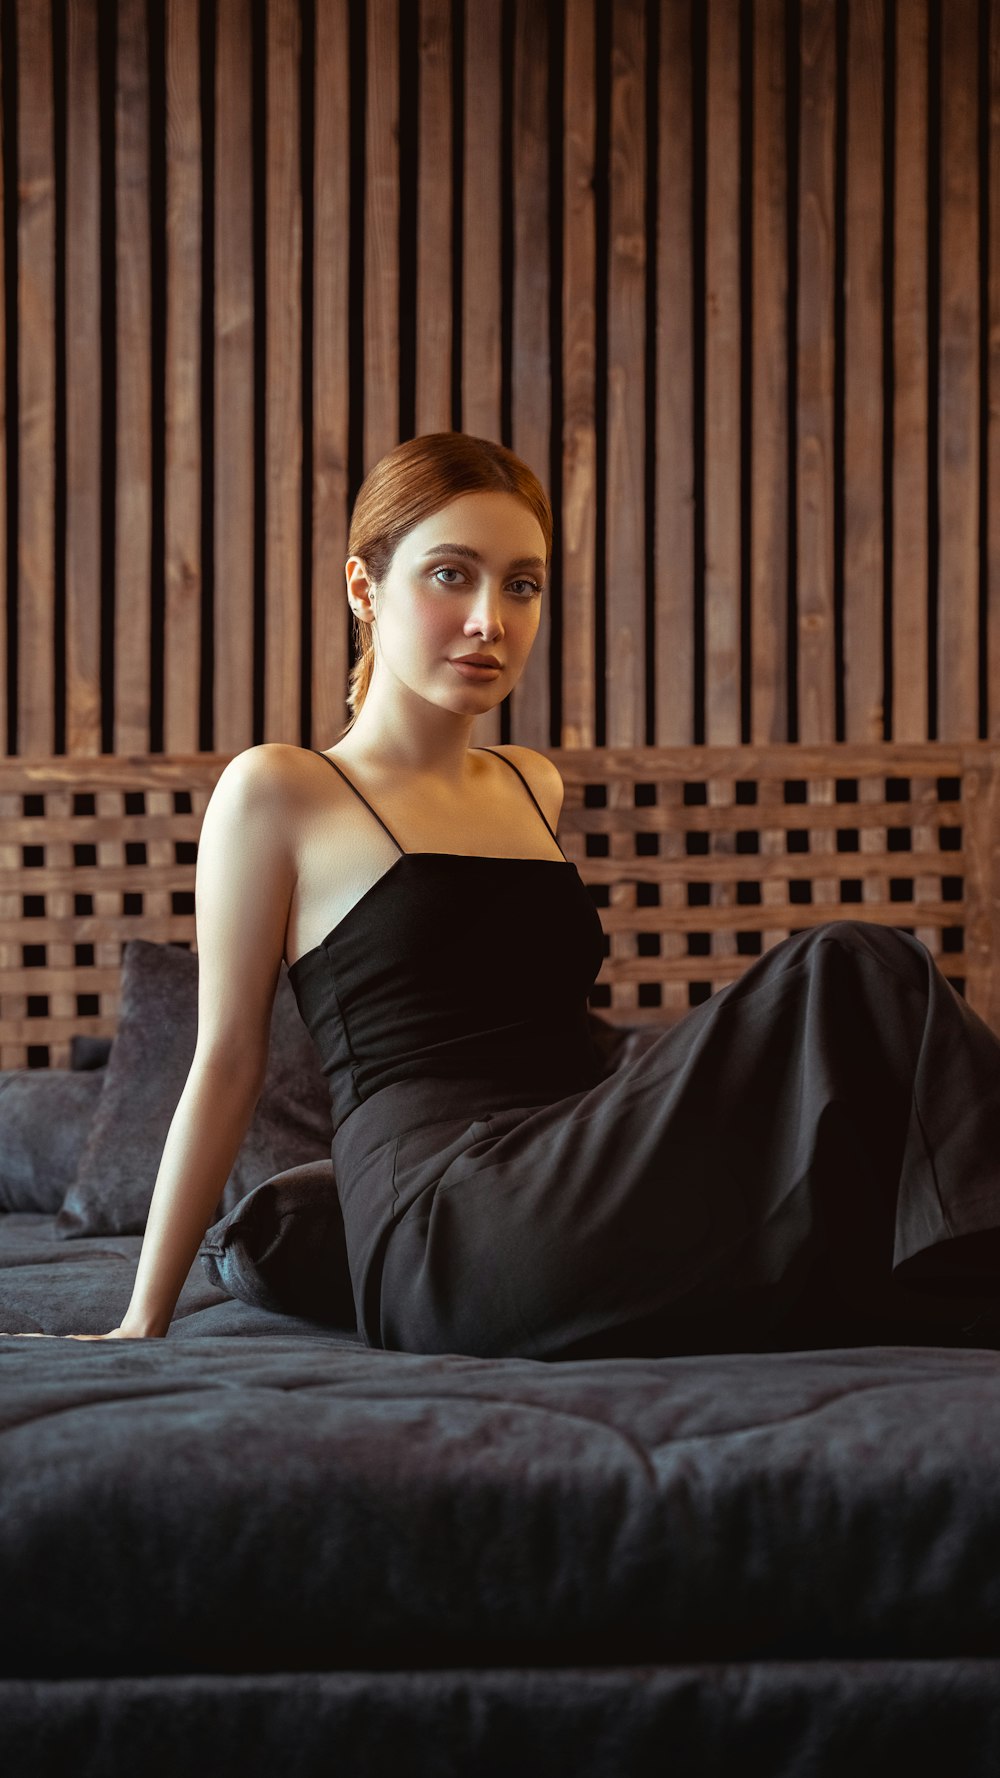 a woman in a black dress sitting on a bed